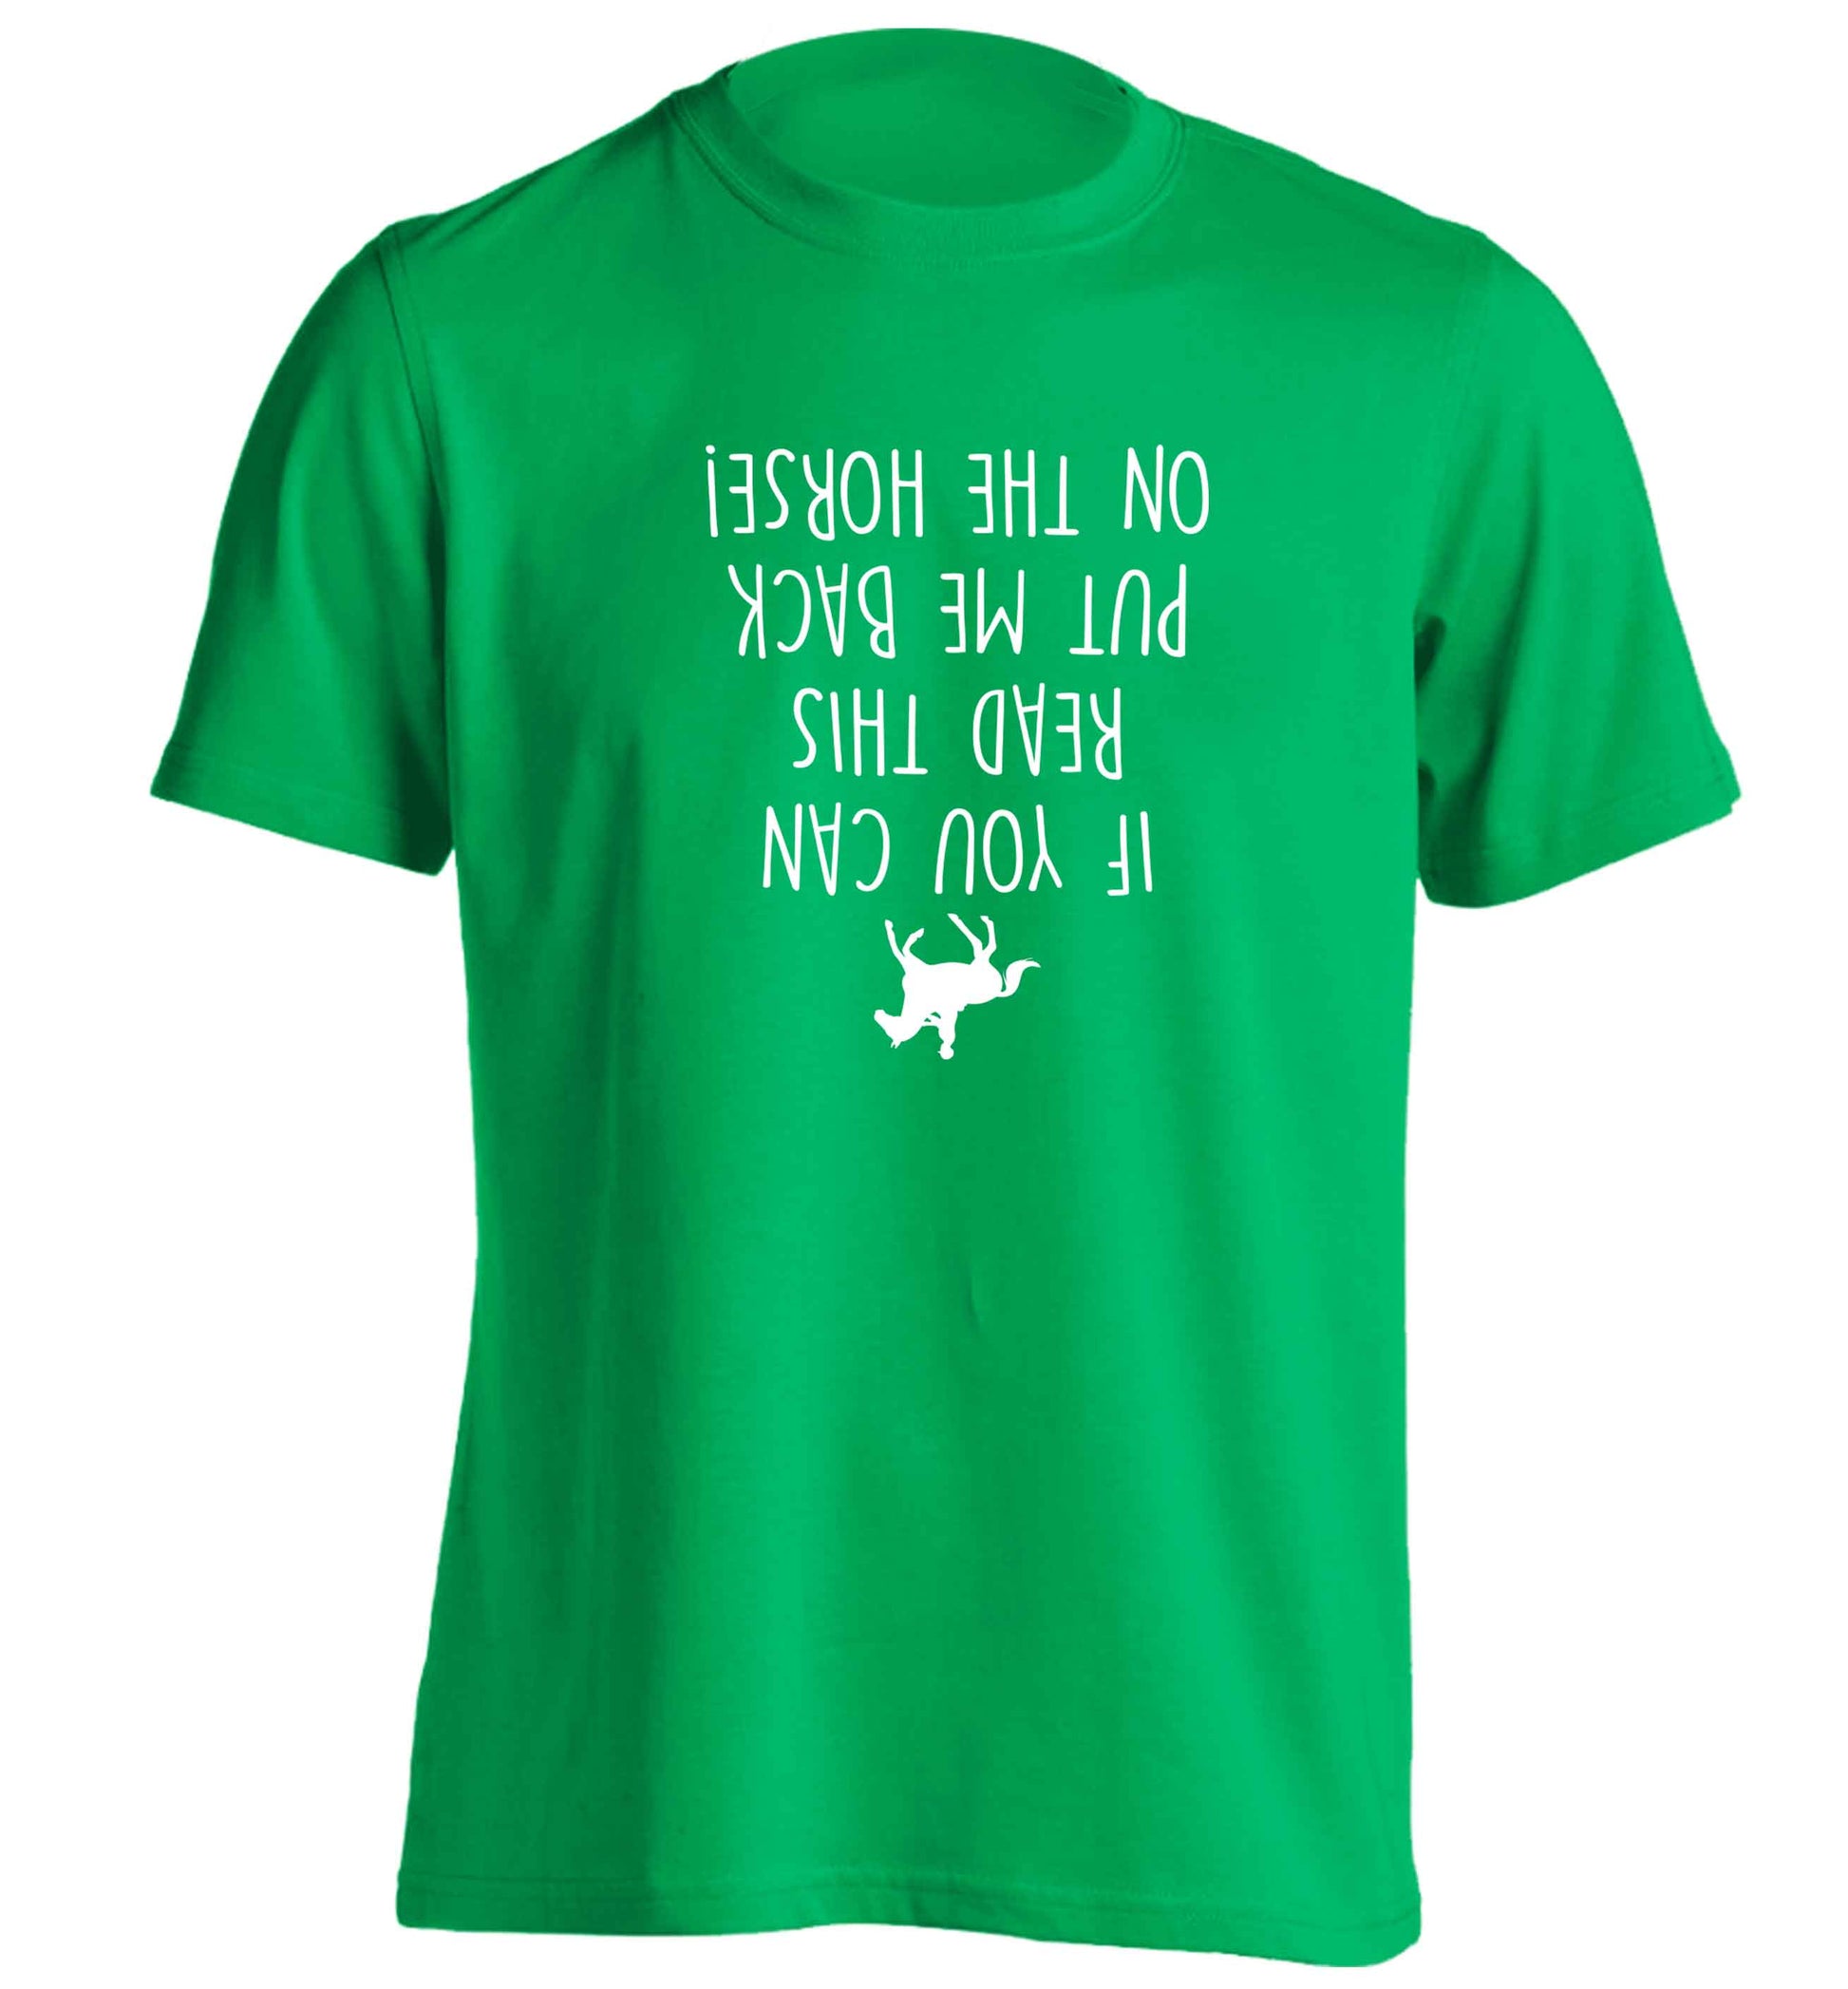 If you can read this put me back on the horse adults unisex green Tshirt 2XL